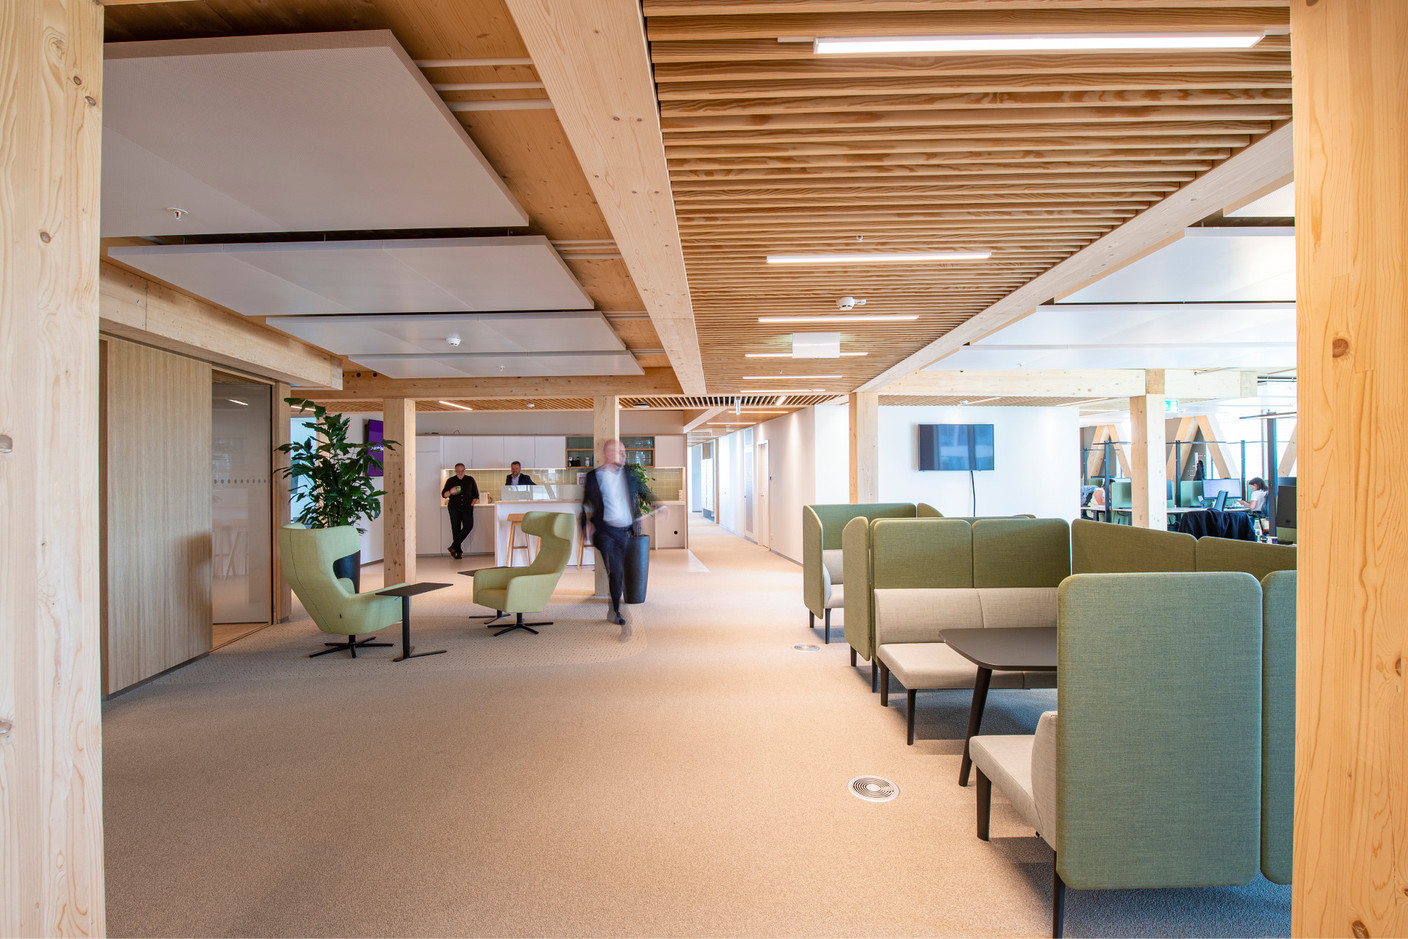 Informal meeting areas have been added to all floors. Photo: Bâloise